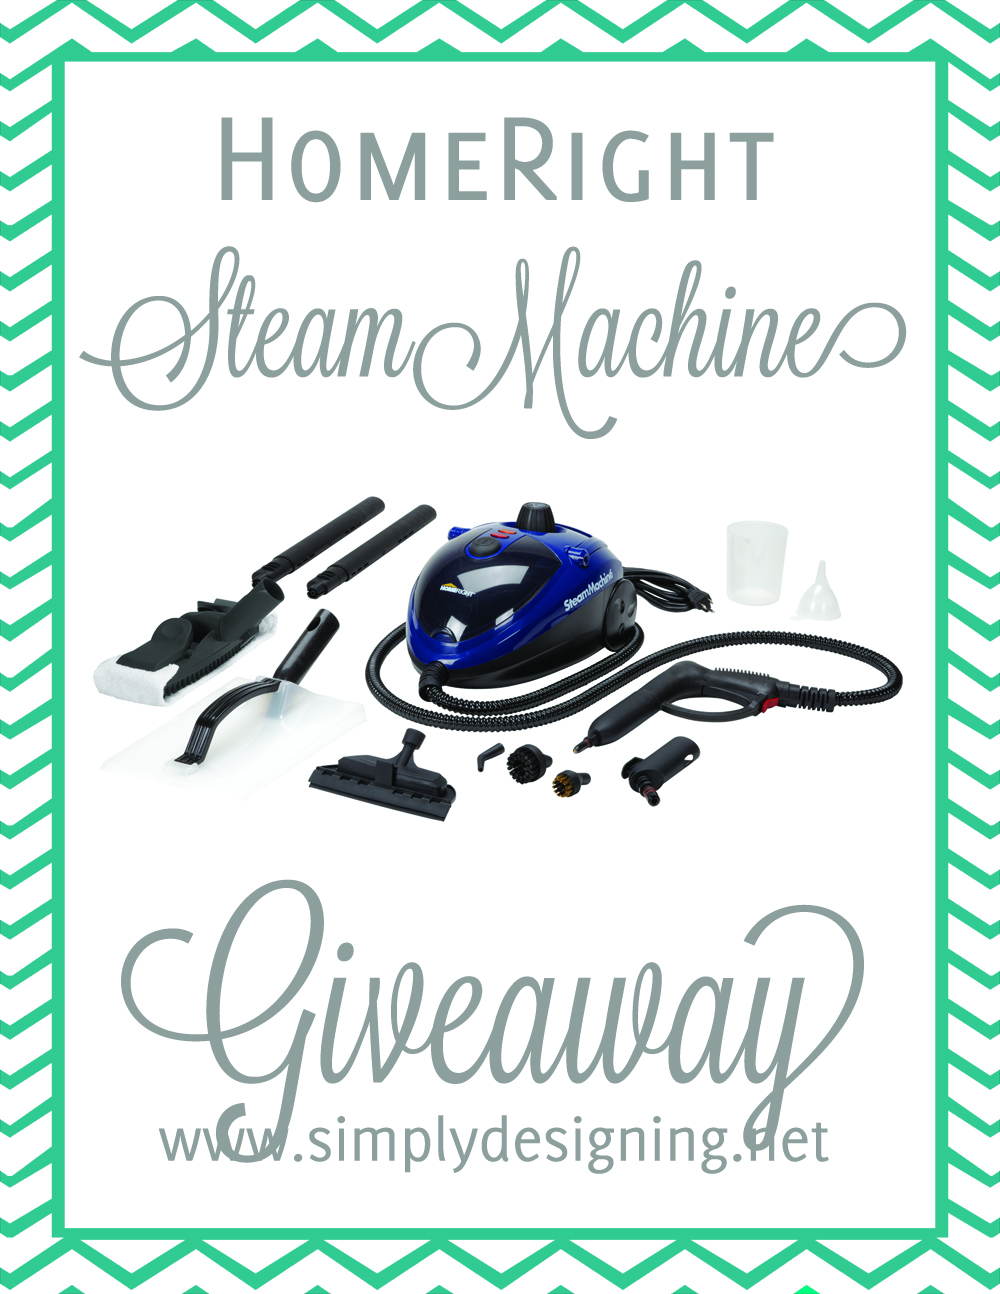 HomeRight Steam Machine Giveaway at Simply Designing | #giveaway #cleaning